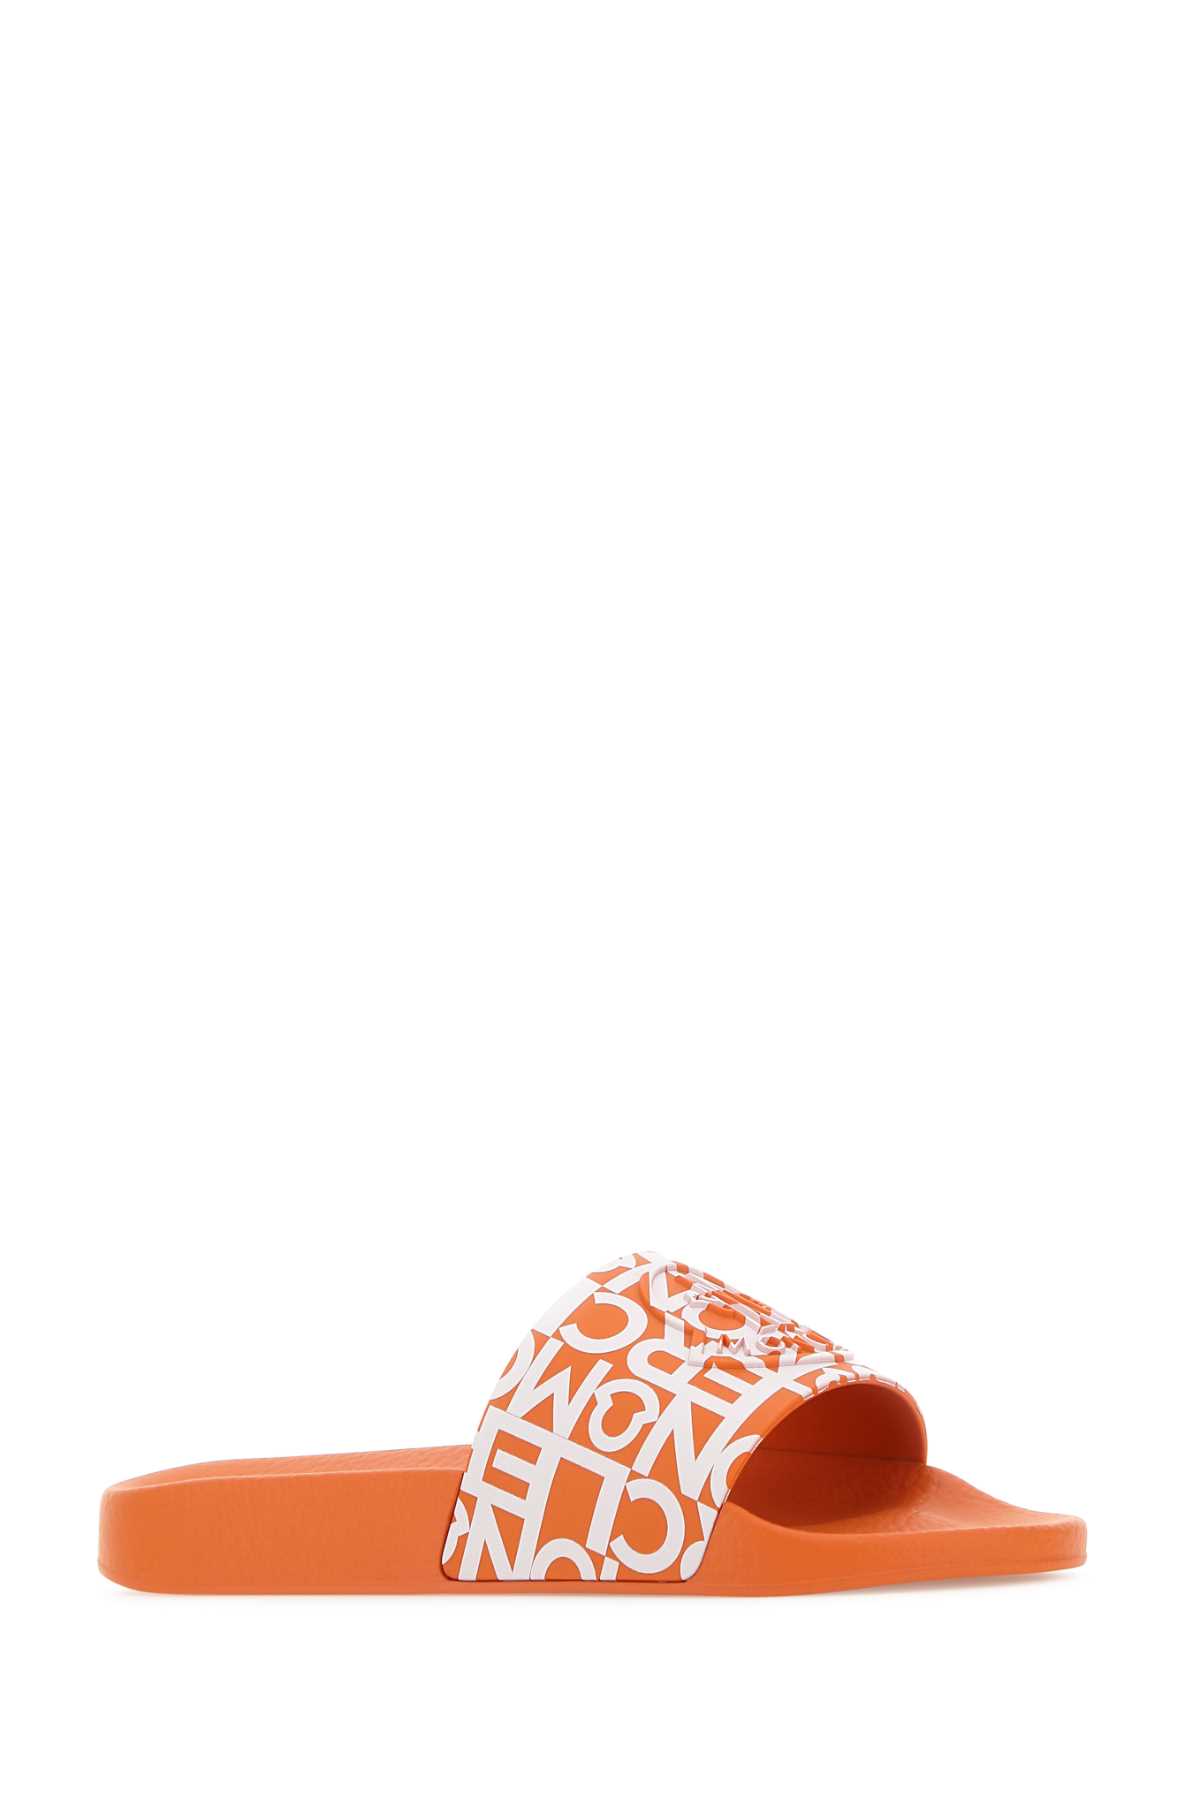 Shop Moncler Printed Rubber Jeanne Slippers In Orange